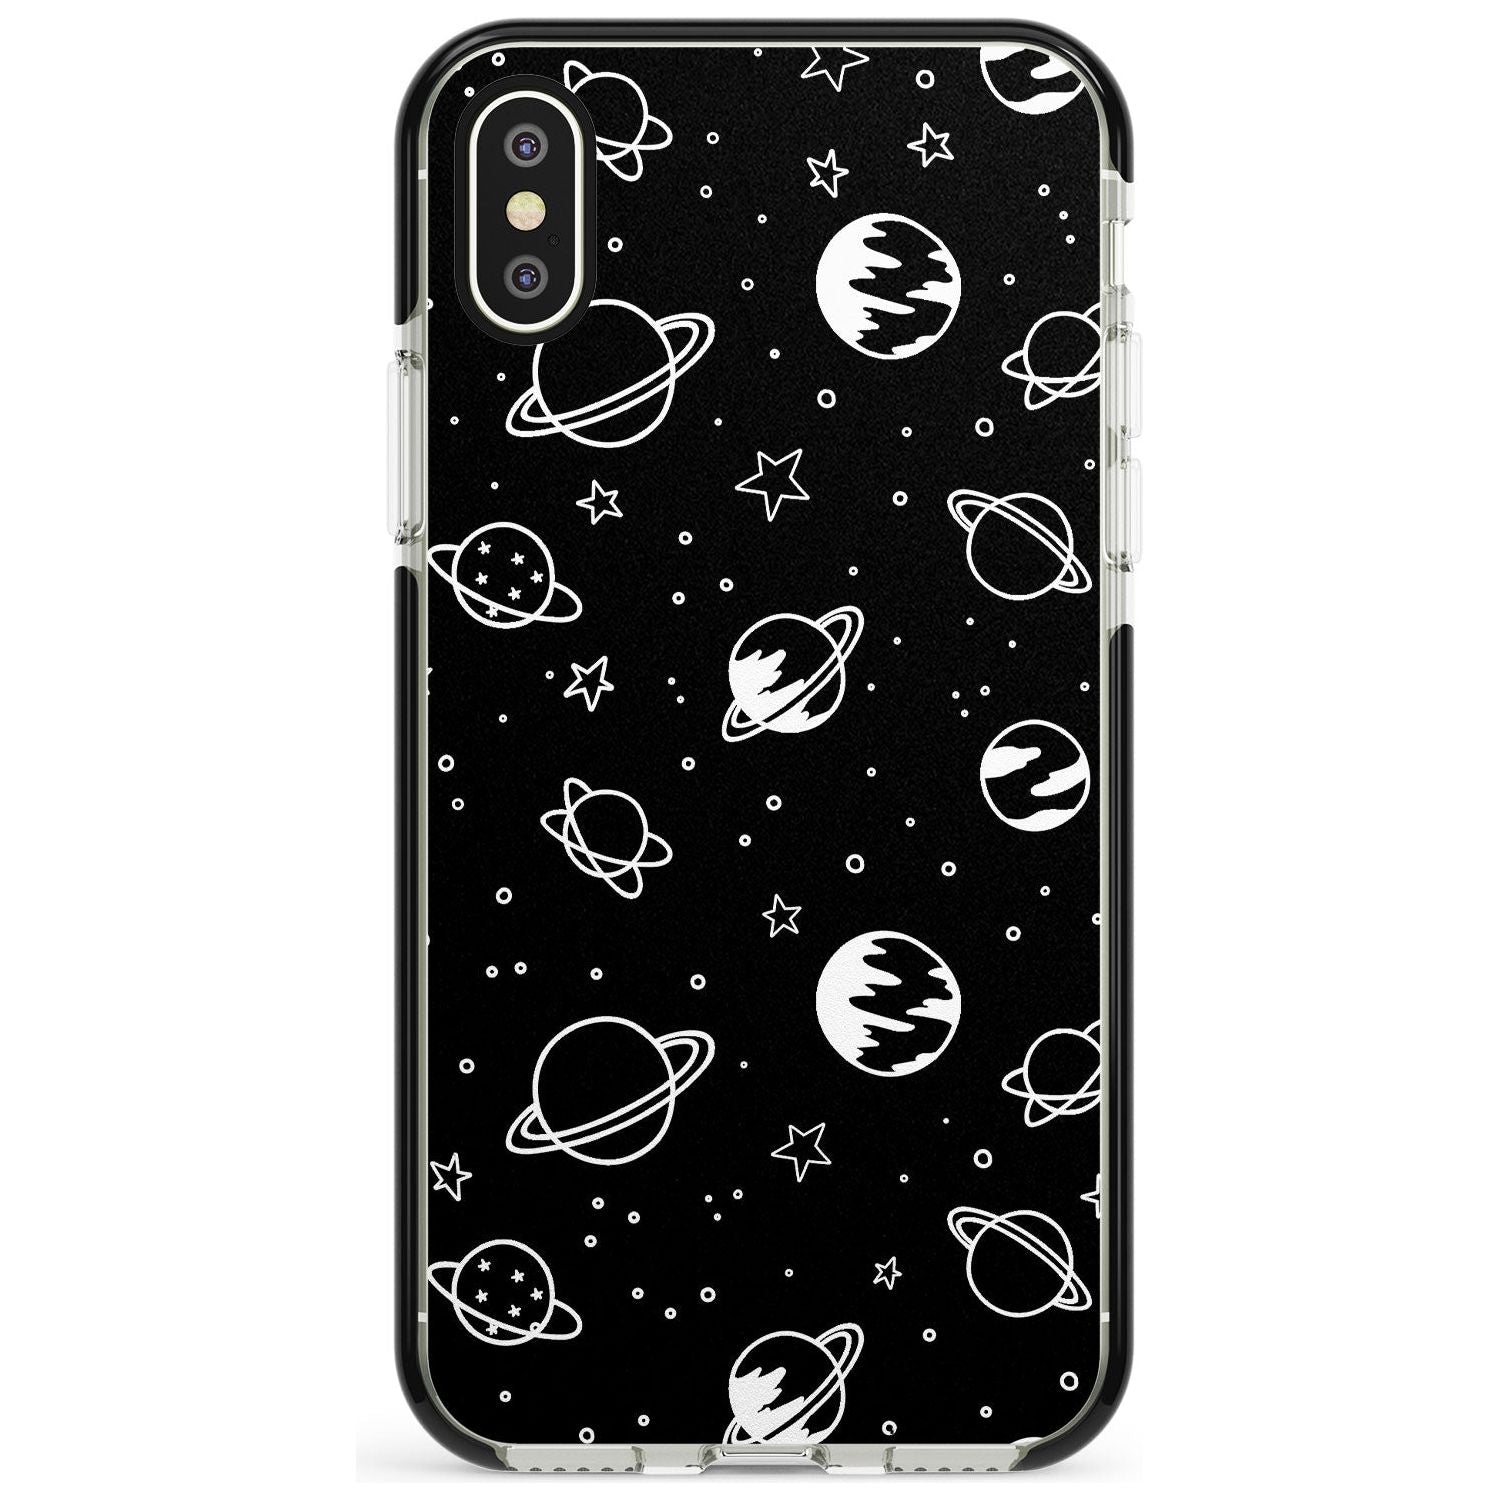 Outer Space Outlines: White on Black Pink Fade Impact Phone Case for iPhone X XS Max XR